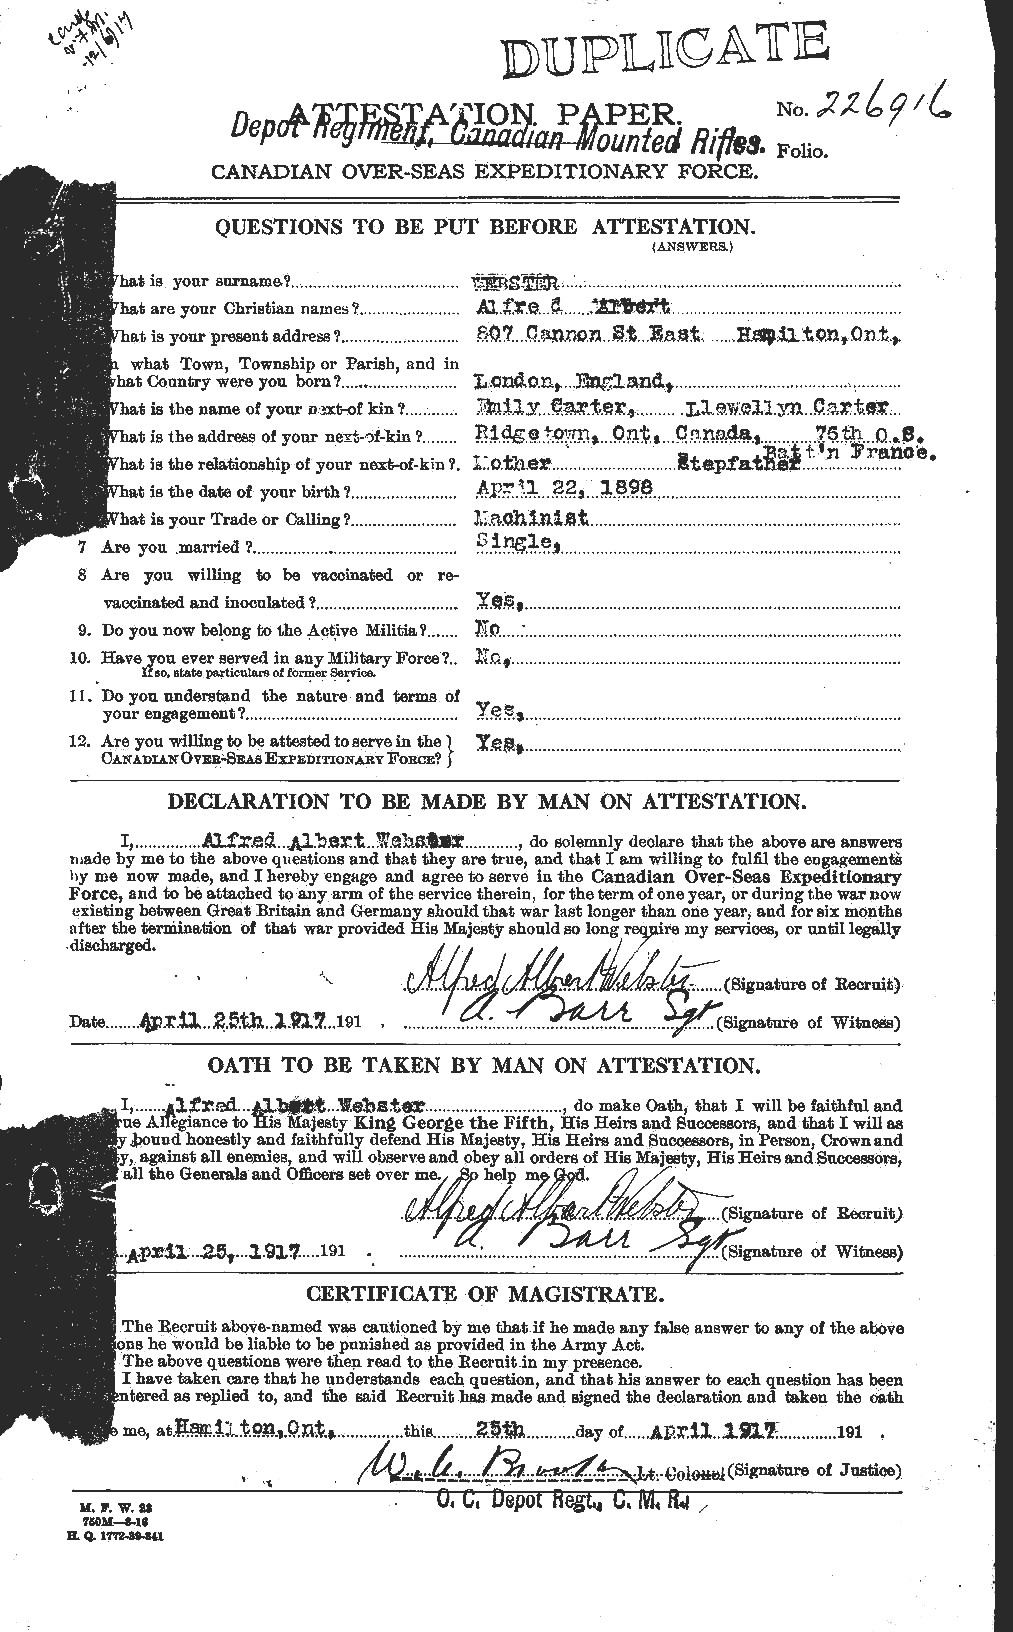 Personnel Records of the First World War - CEF 670243a